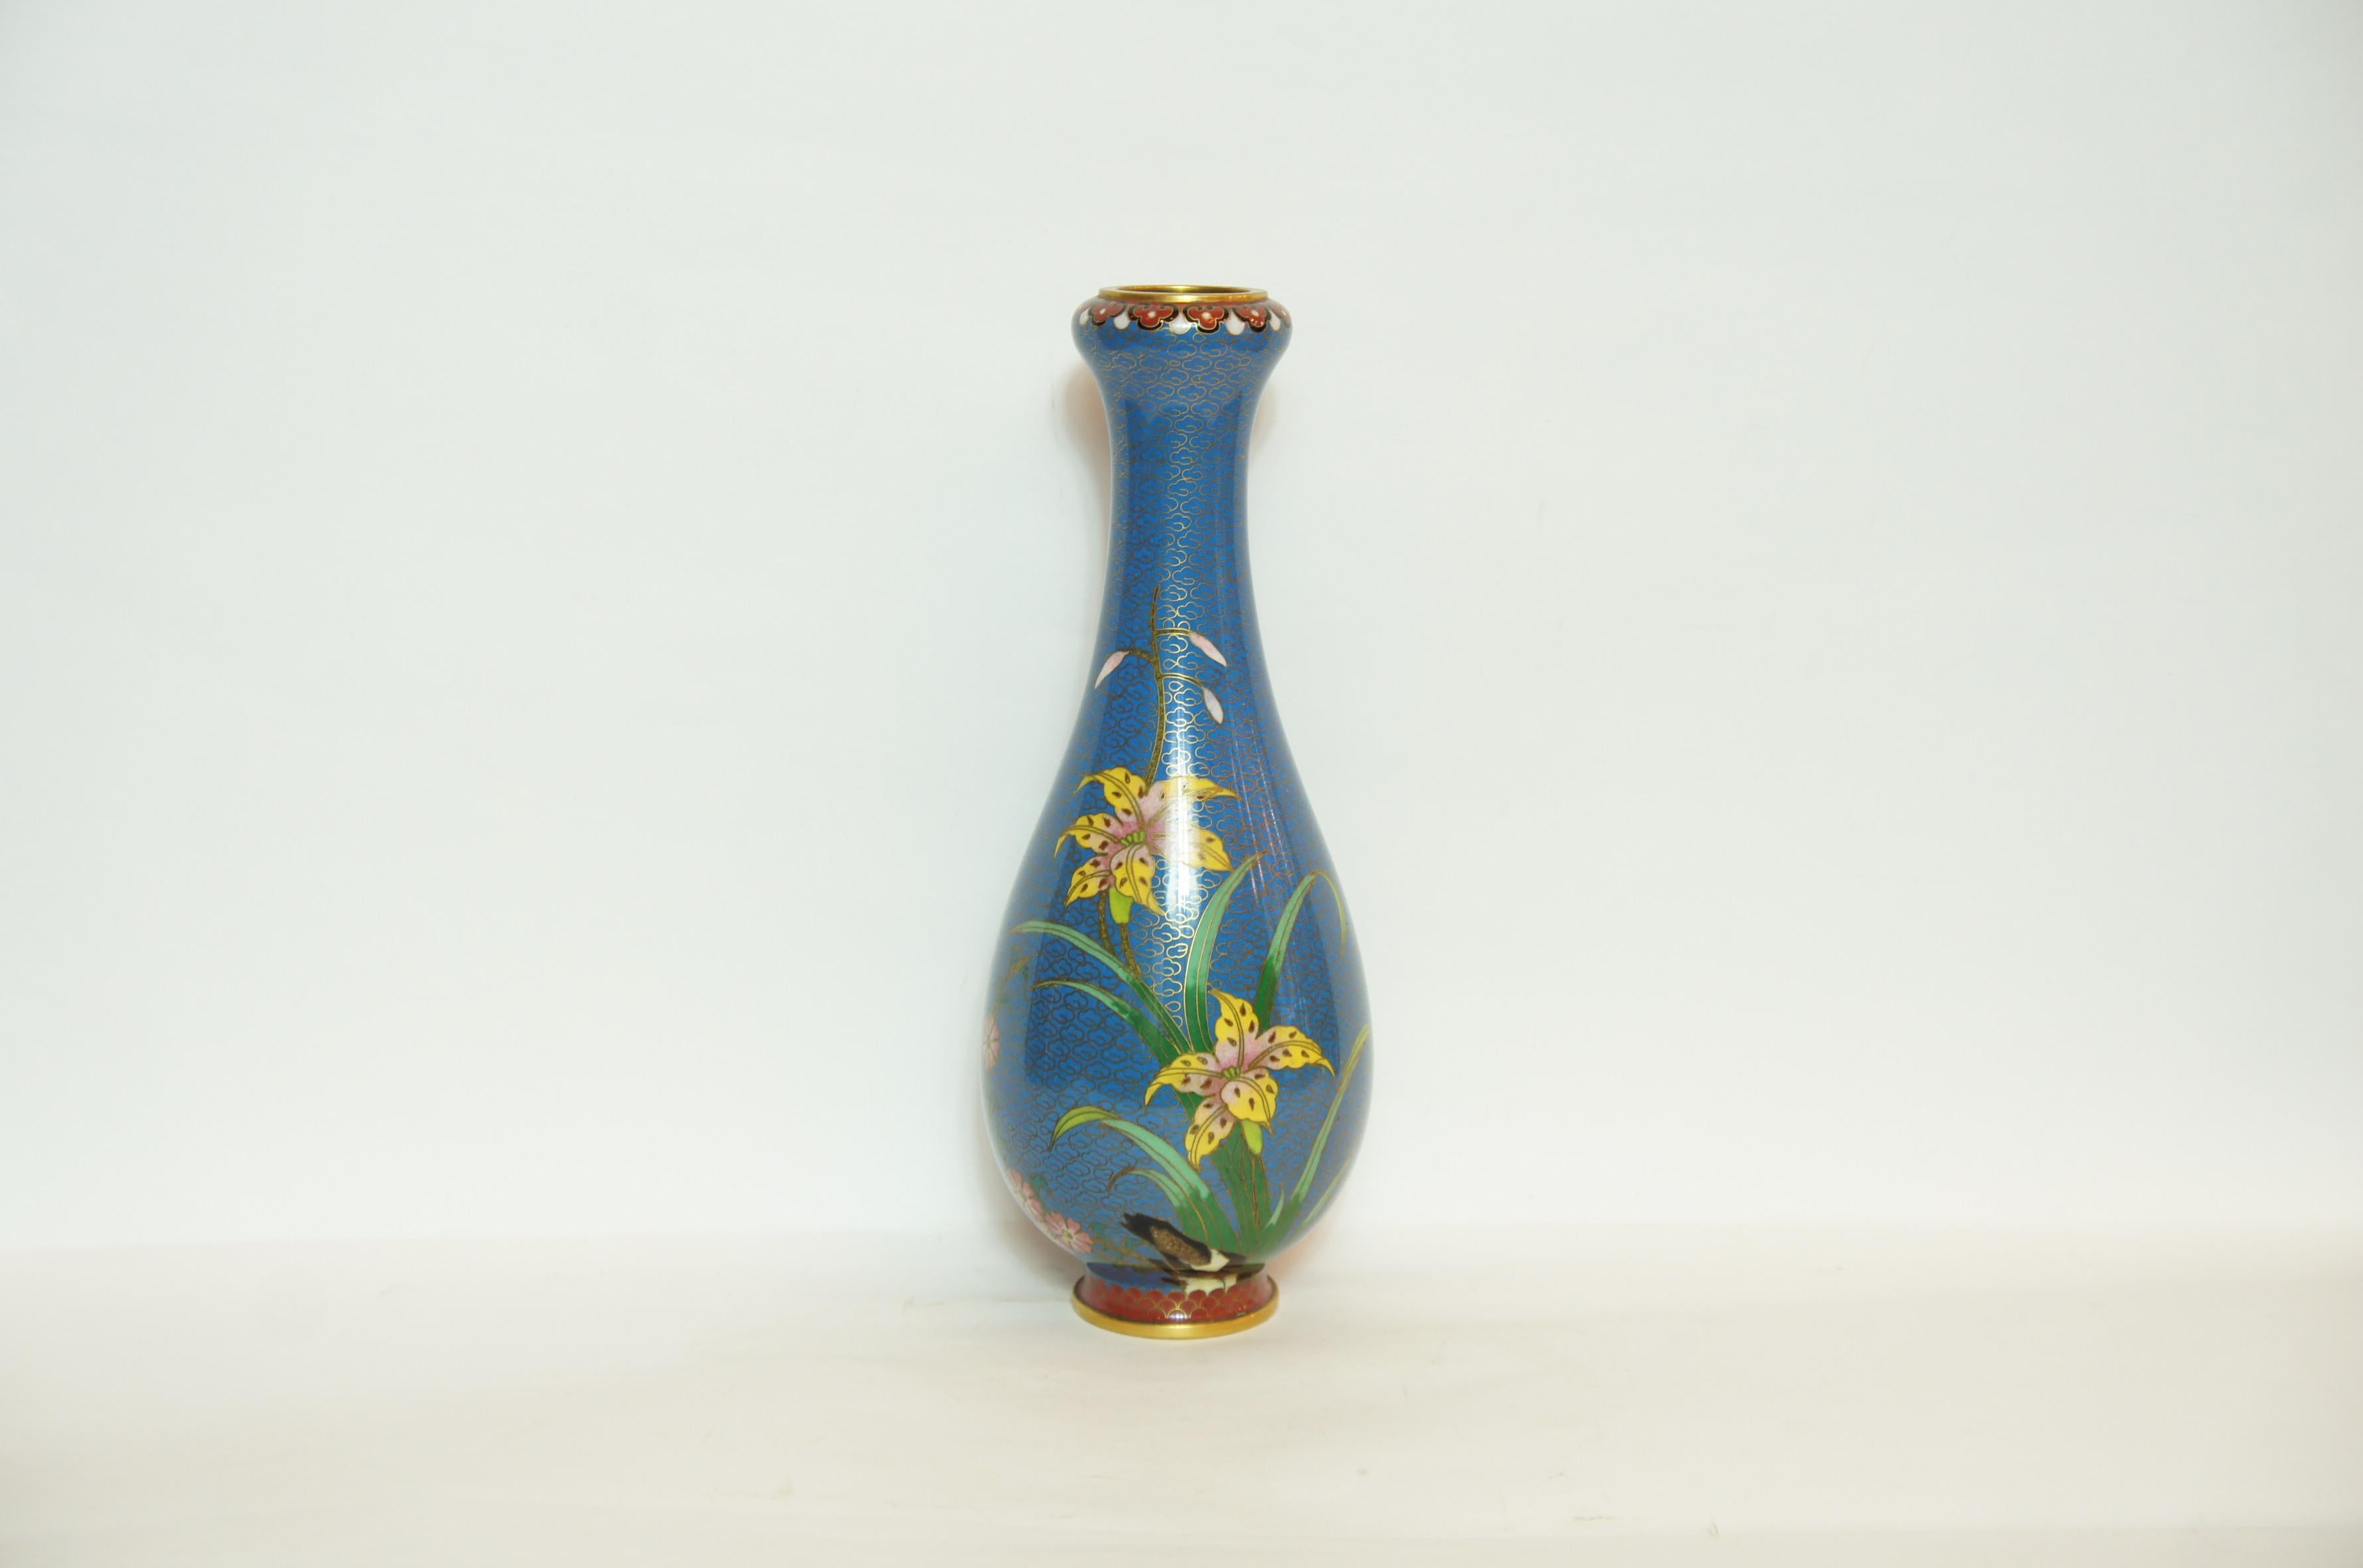 This is a blue flower vase made in Japan around 1950 in Showa era.
It is designed some flowers and butterflies. 
This style made with copper is called Shippou in Japanese.
The cloisonné technique was mastered in China in the early 19th century